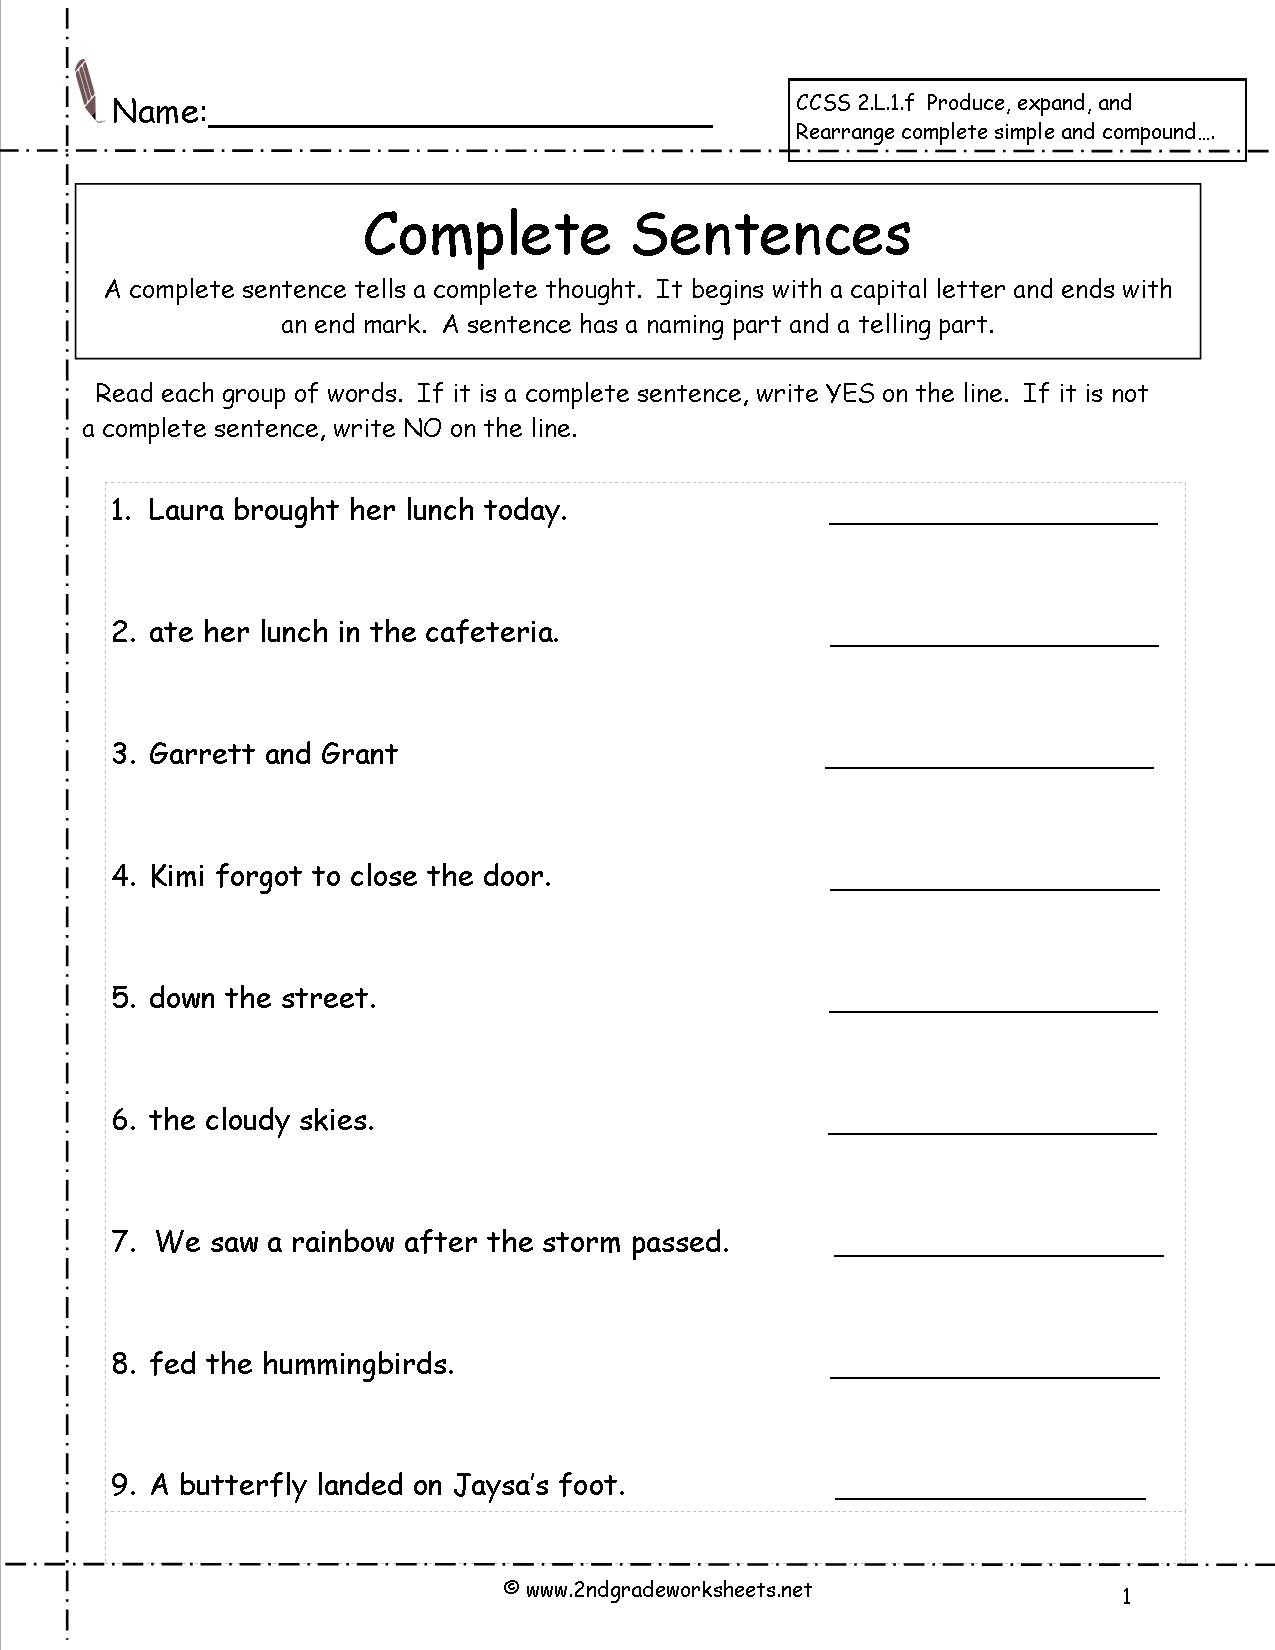 Topic Sentence Worksheets 2nd Grade Second Grade Sentences Worksheets Ccss 2 L 1 F Worksheets